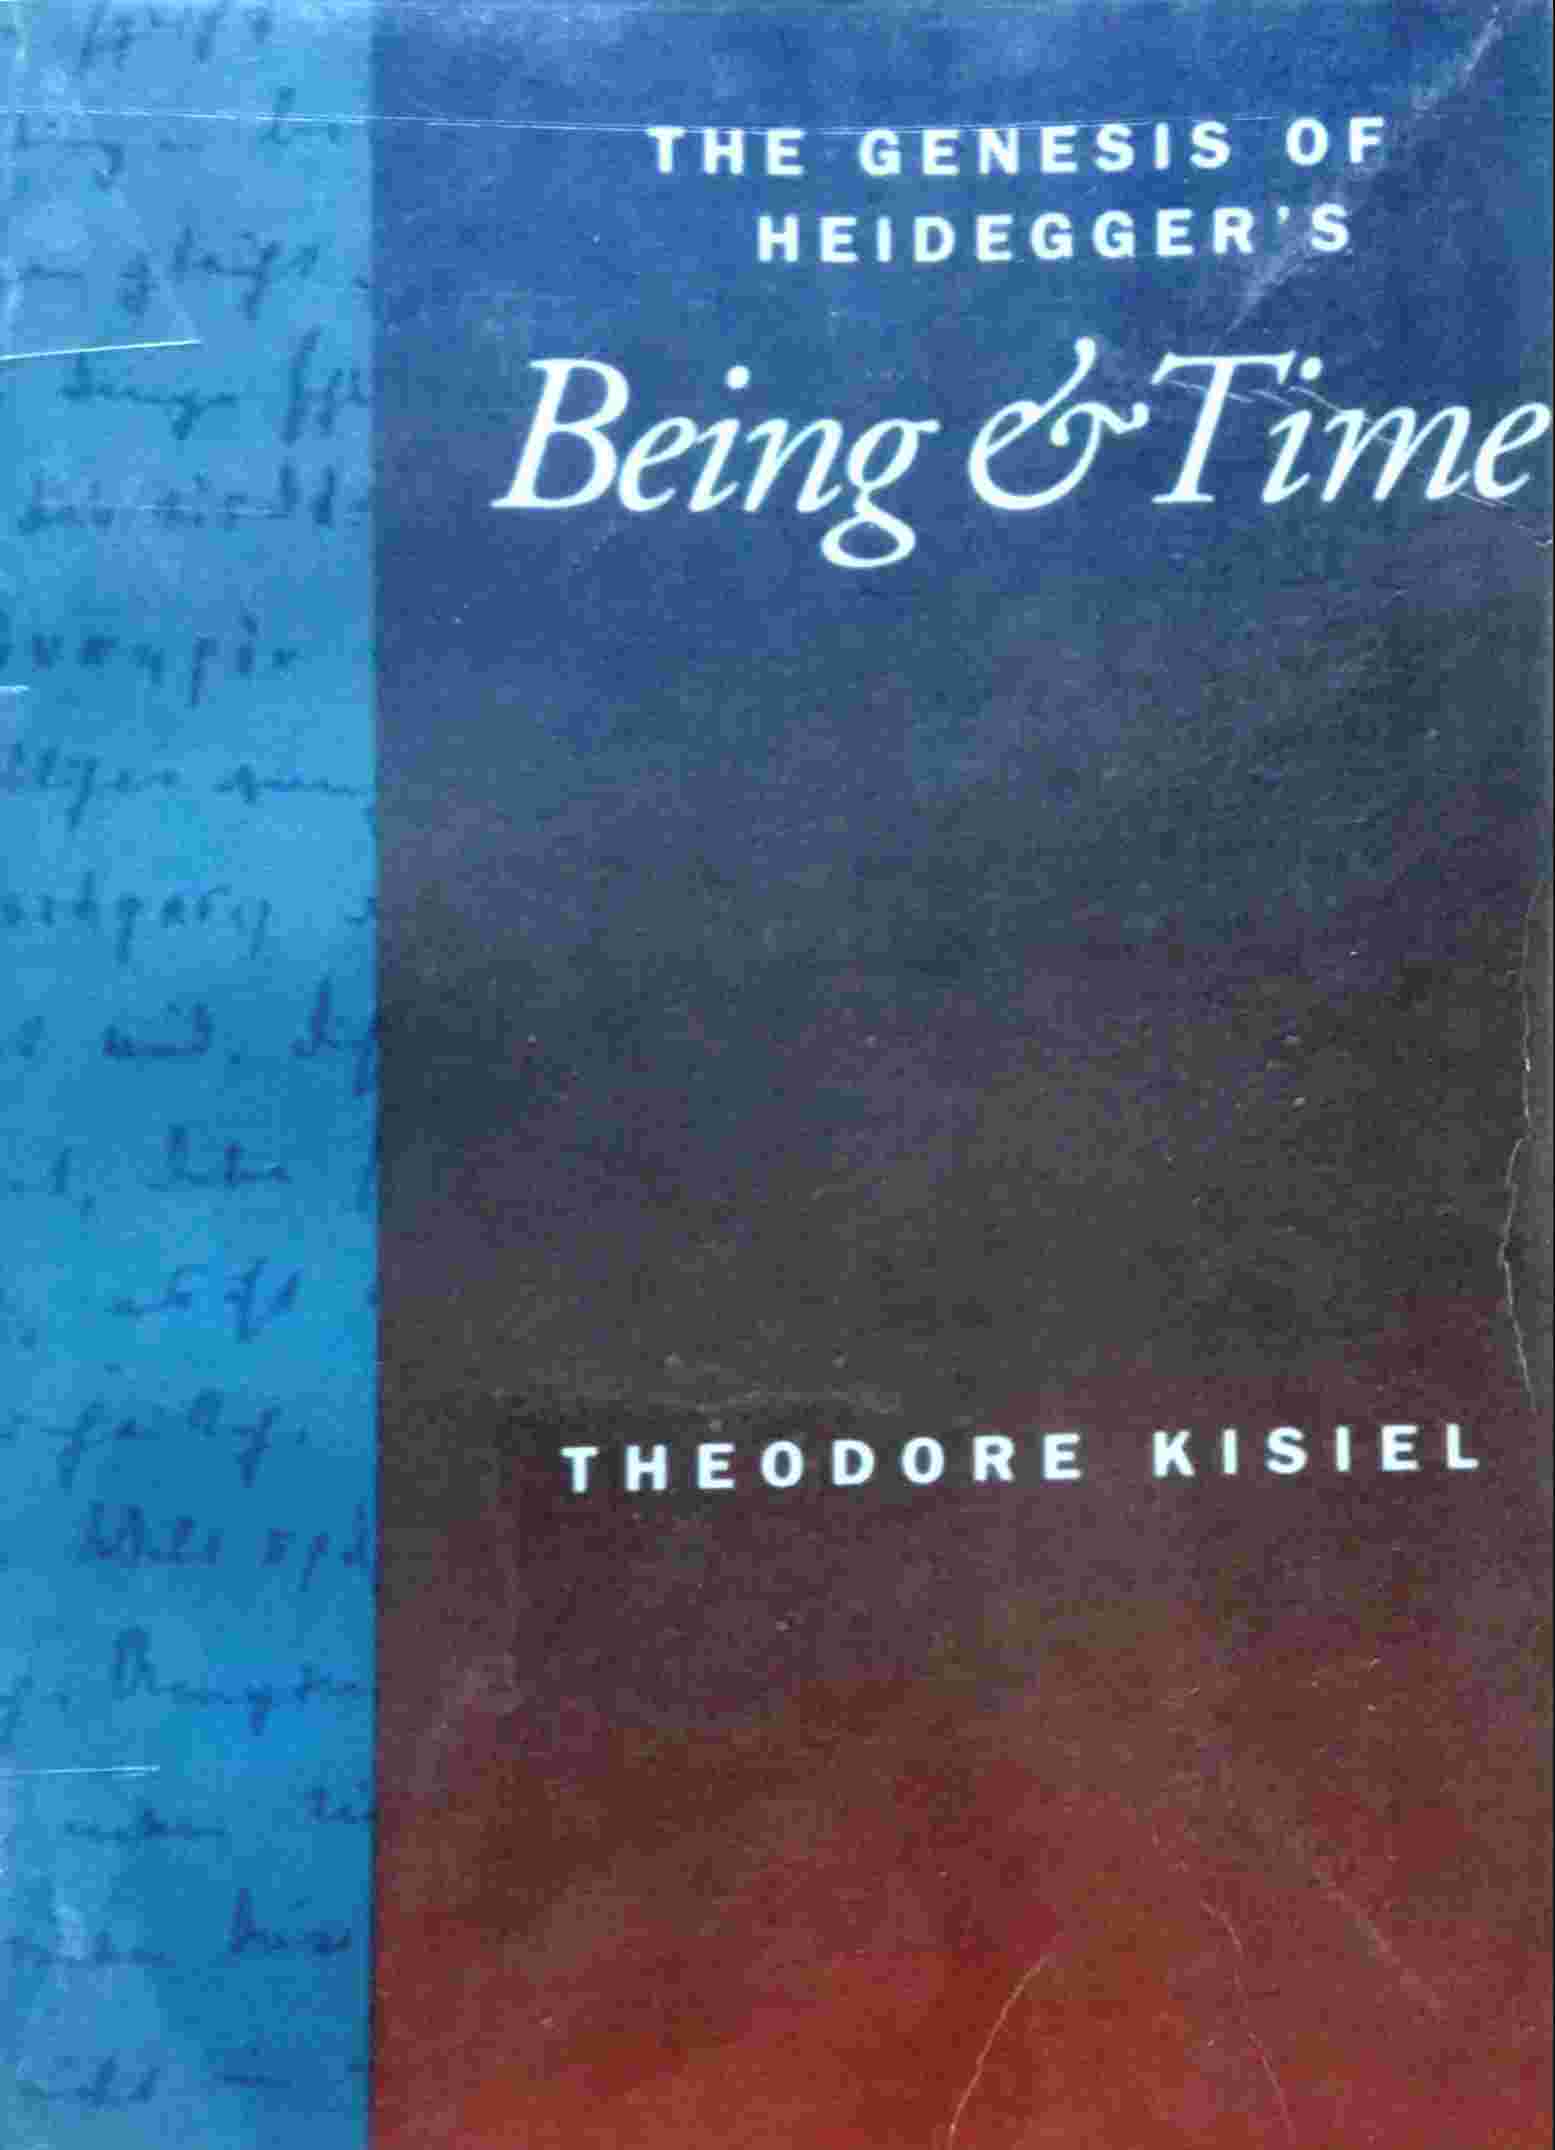 THE GENESIS OF HEIDEGGER's BEING AND TIME